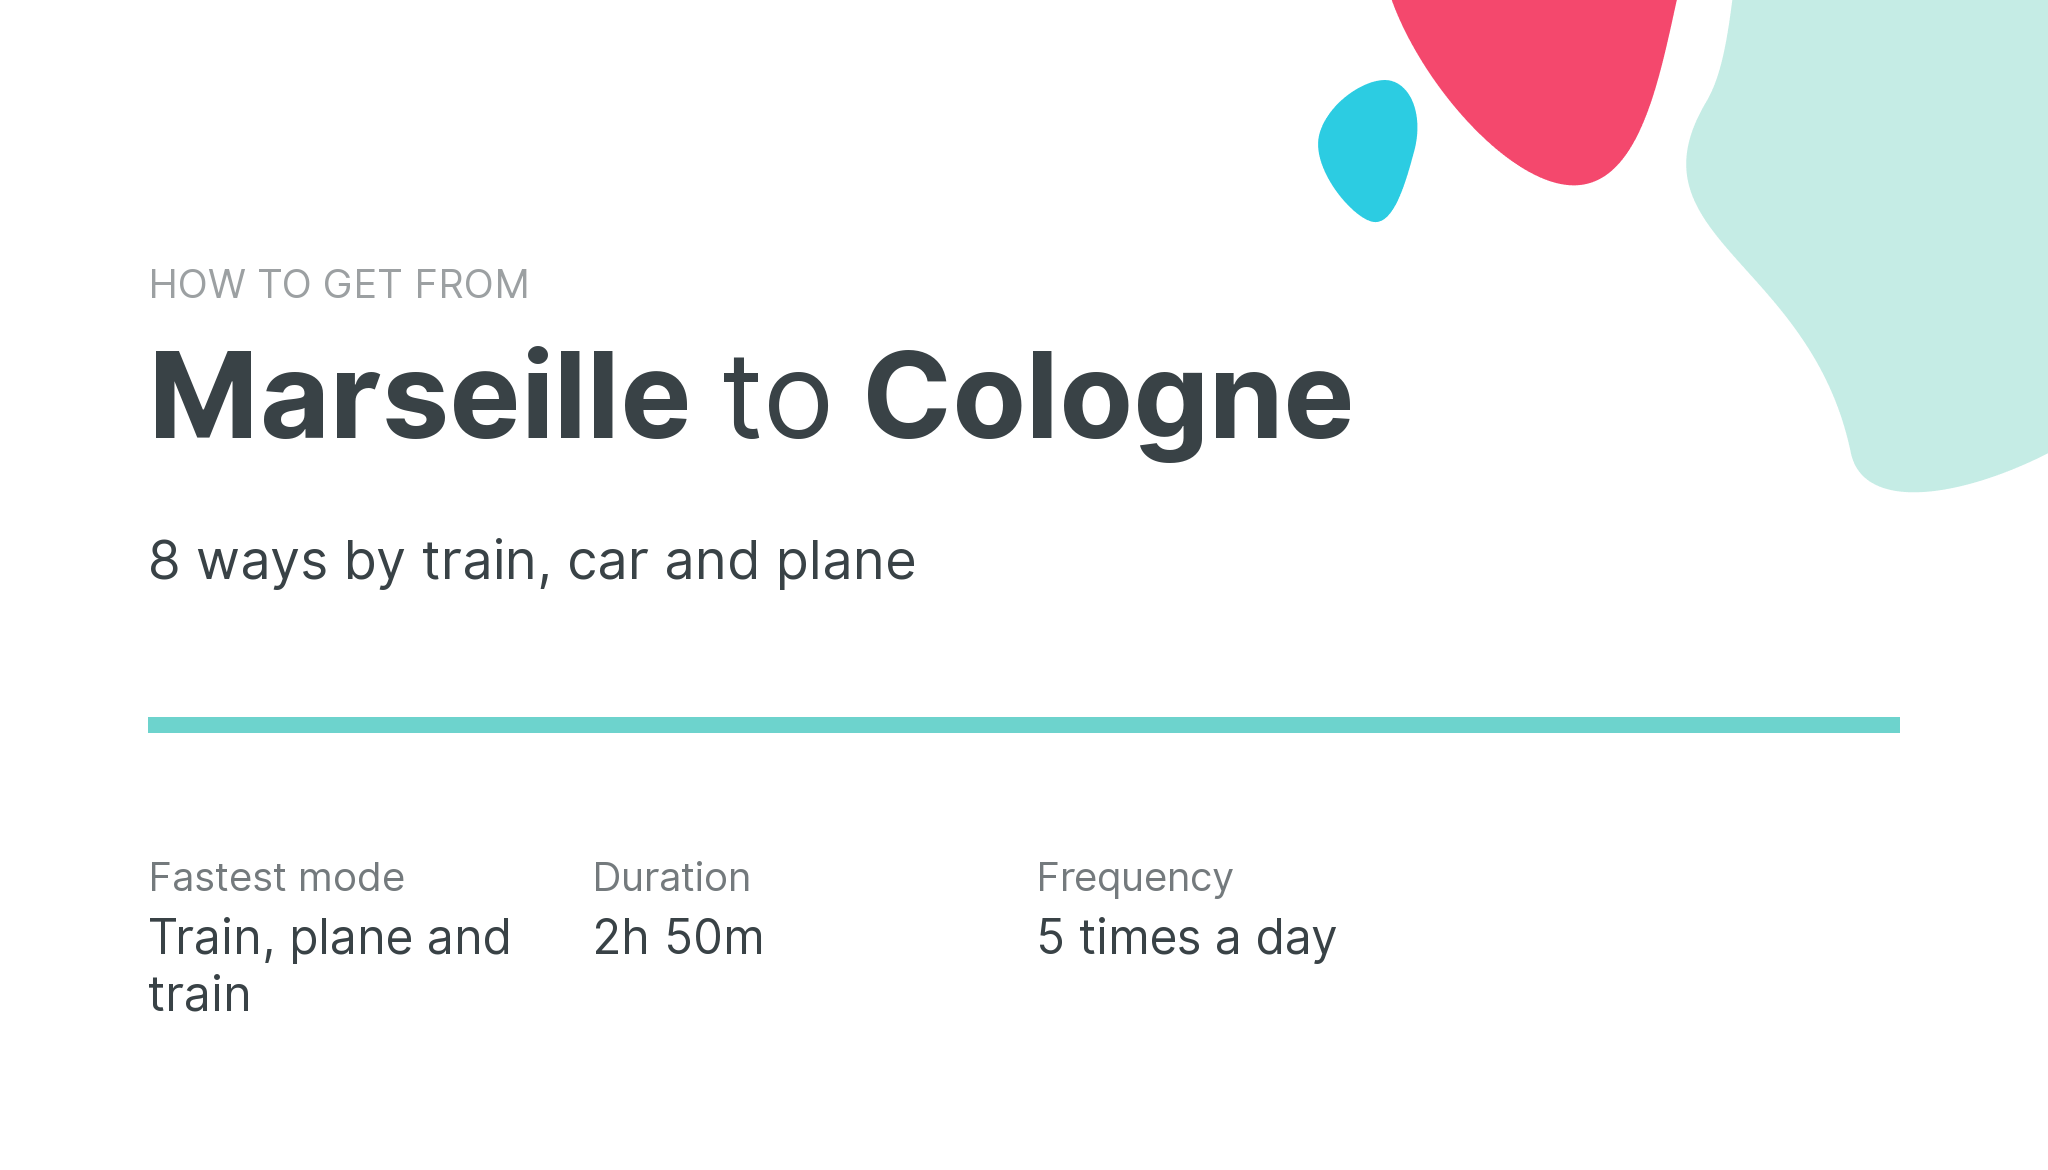 How do I get from Marseille to Cologne